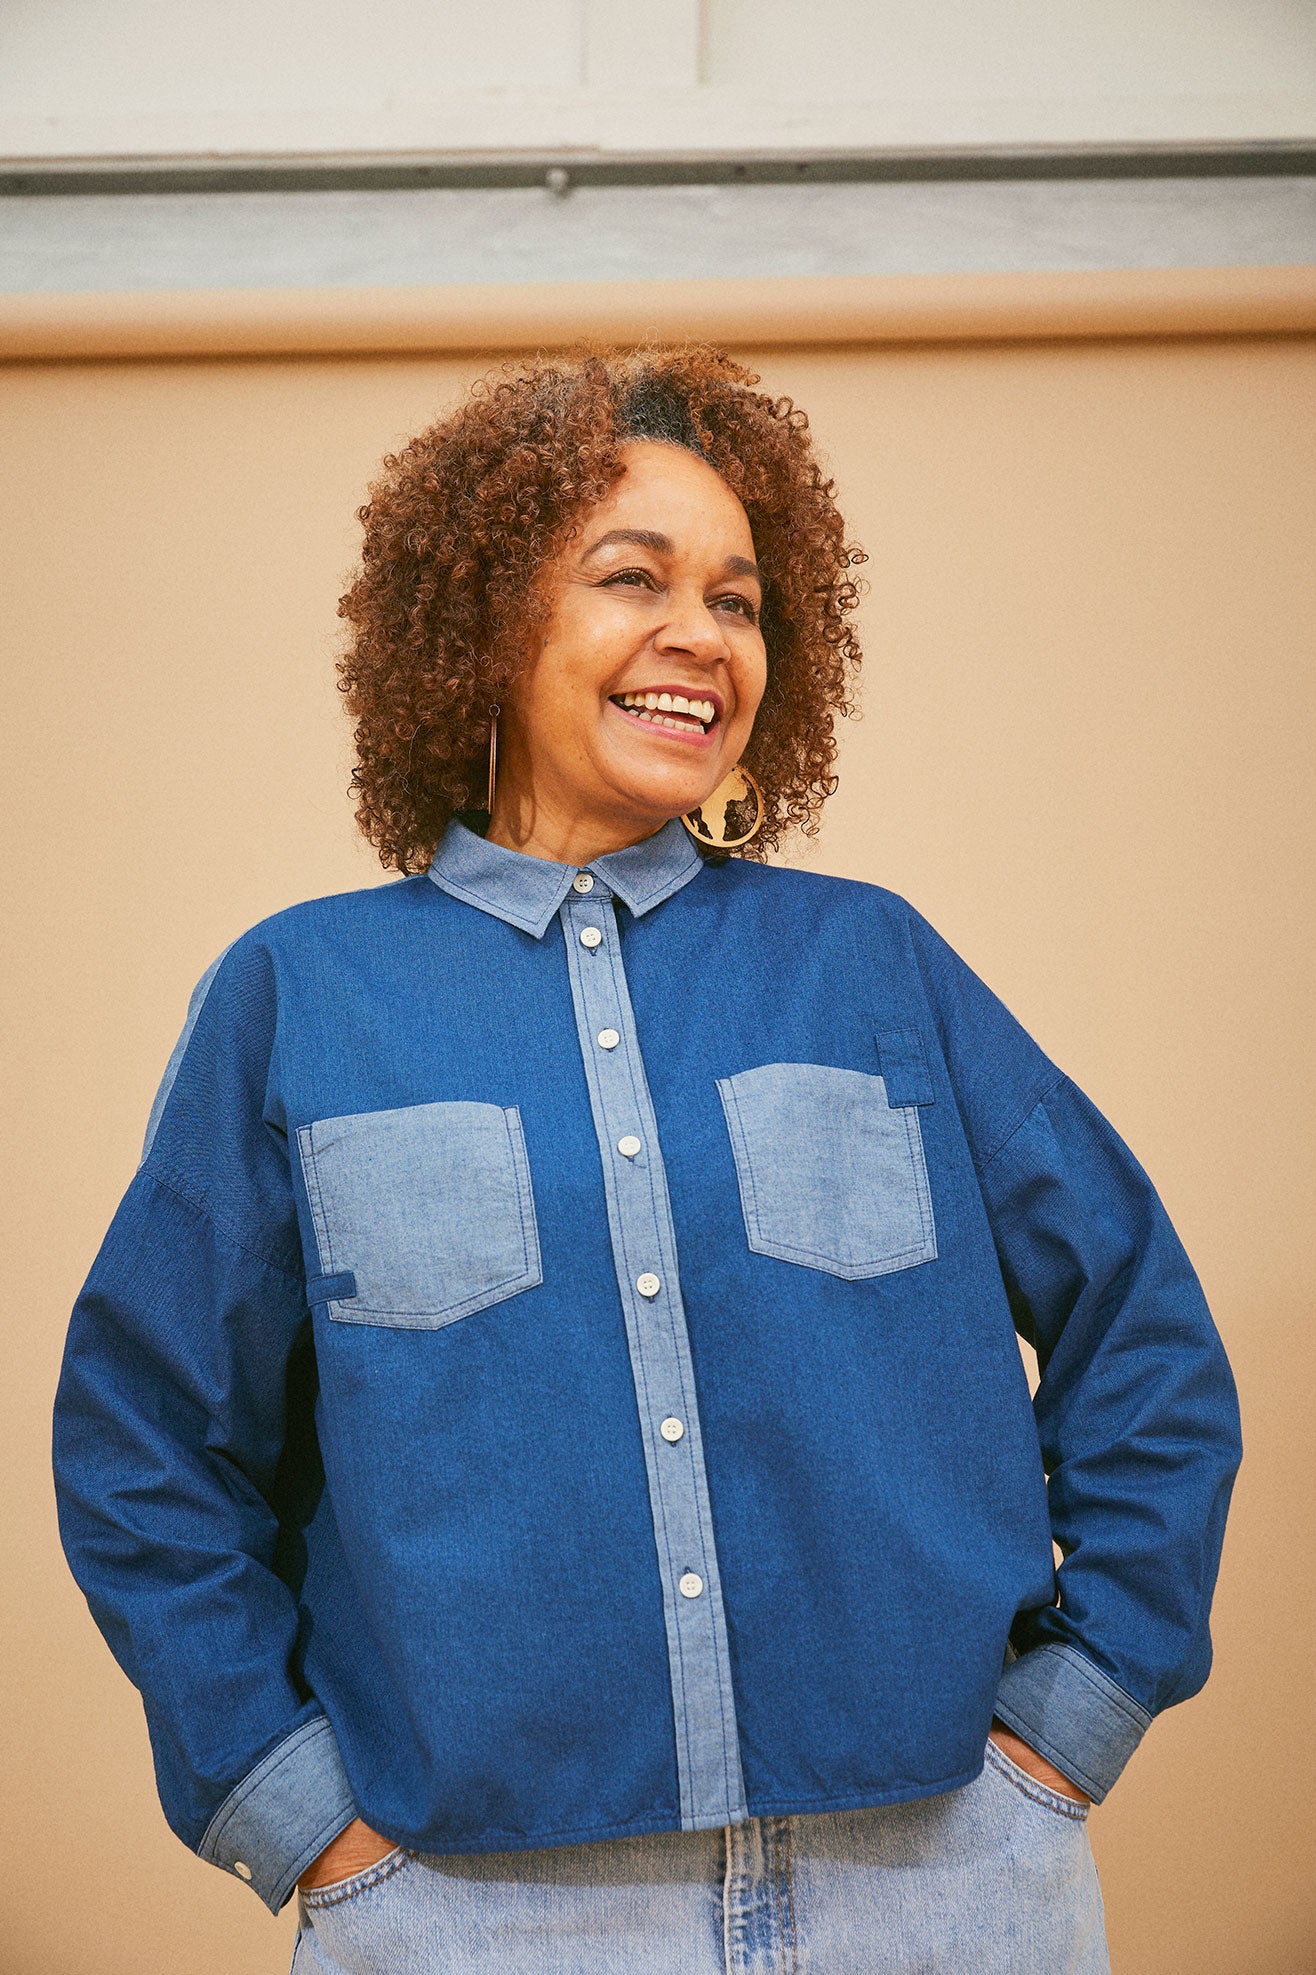 Model stands in front of coffee background. She wears Saywood's Japanese Denim Lela Patchwork Shirt, with light wash contrast cuffs, pockets and collar. Worn with jeans.